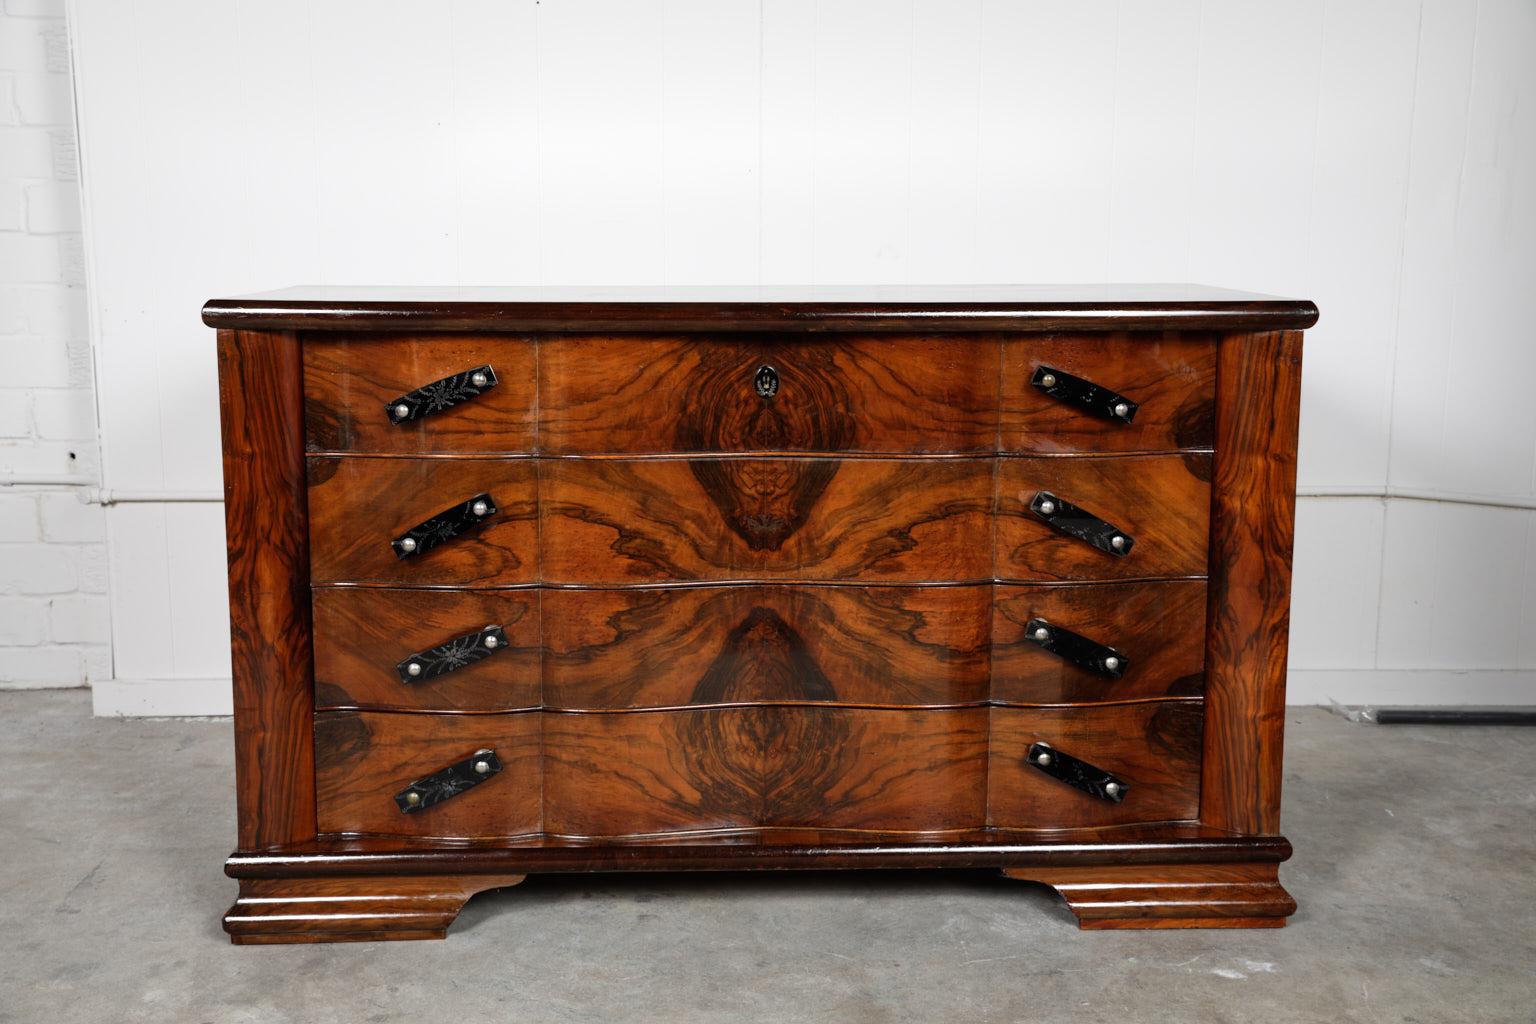 Early 20th century Italian Art Deco Period commode covered in a fine quality palisander veneer that has been bookmatched. The case holds four inset scalloped drawers with beautiful black etched handles set on a diagonal. The case is raised on molded